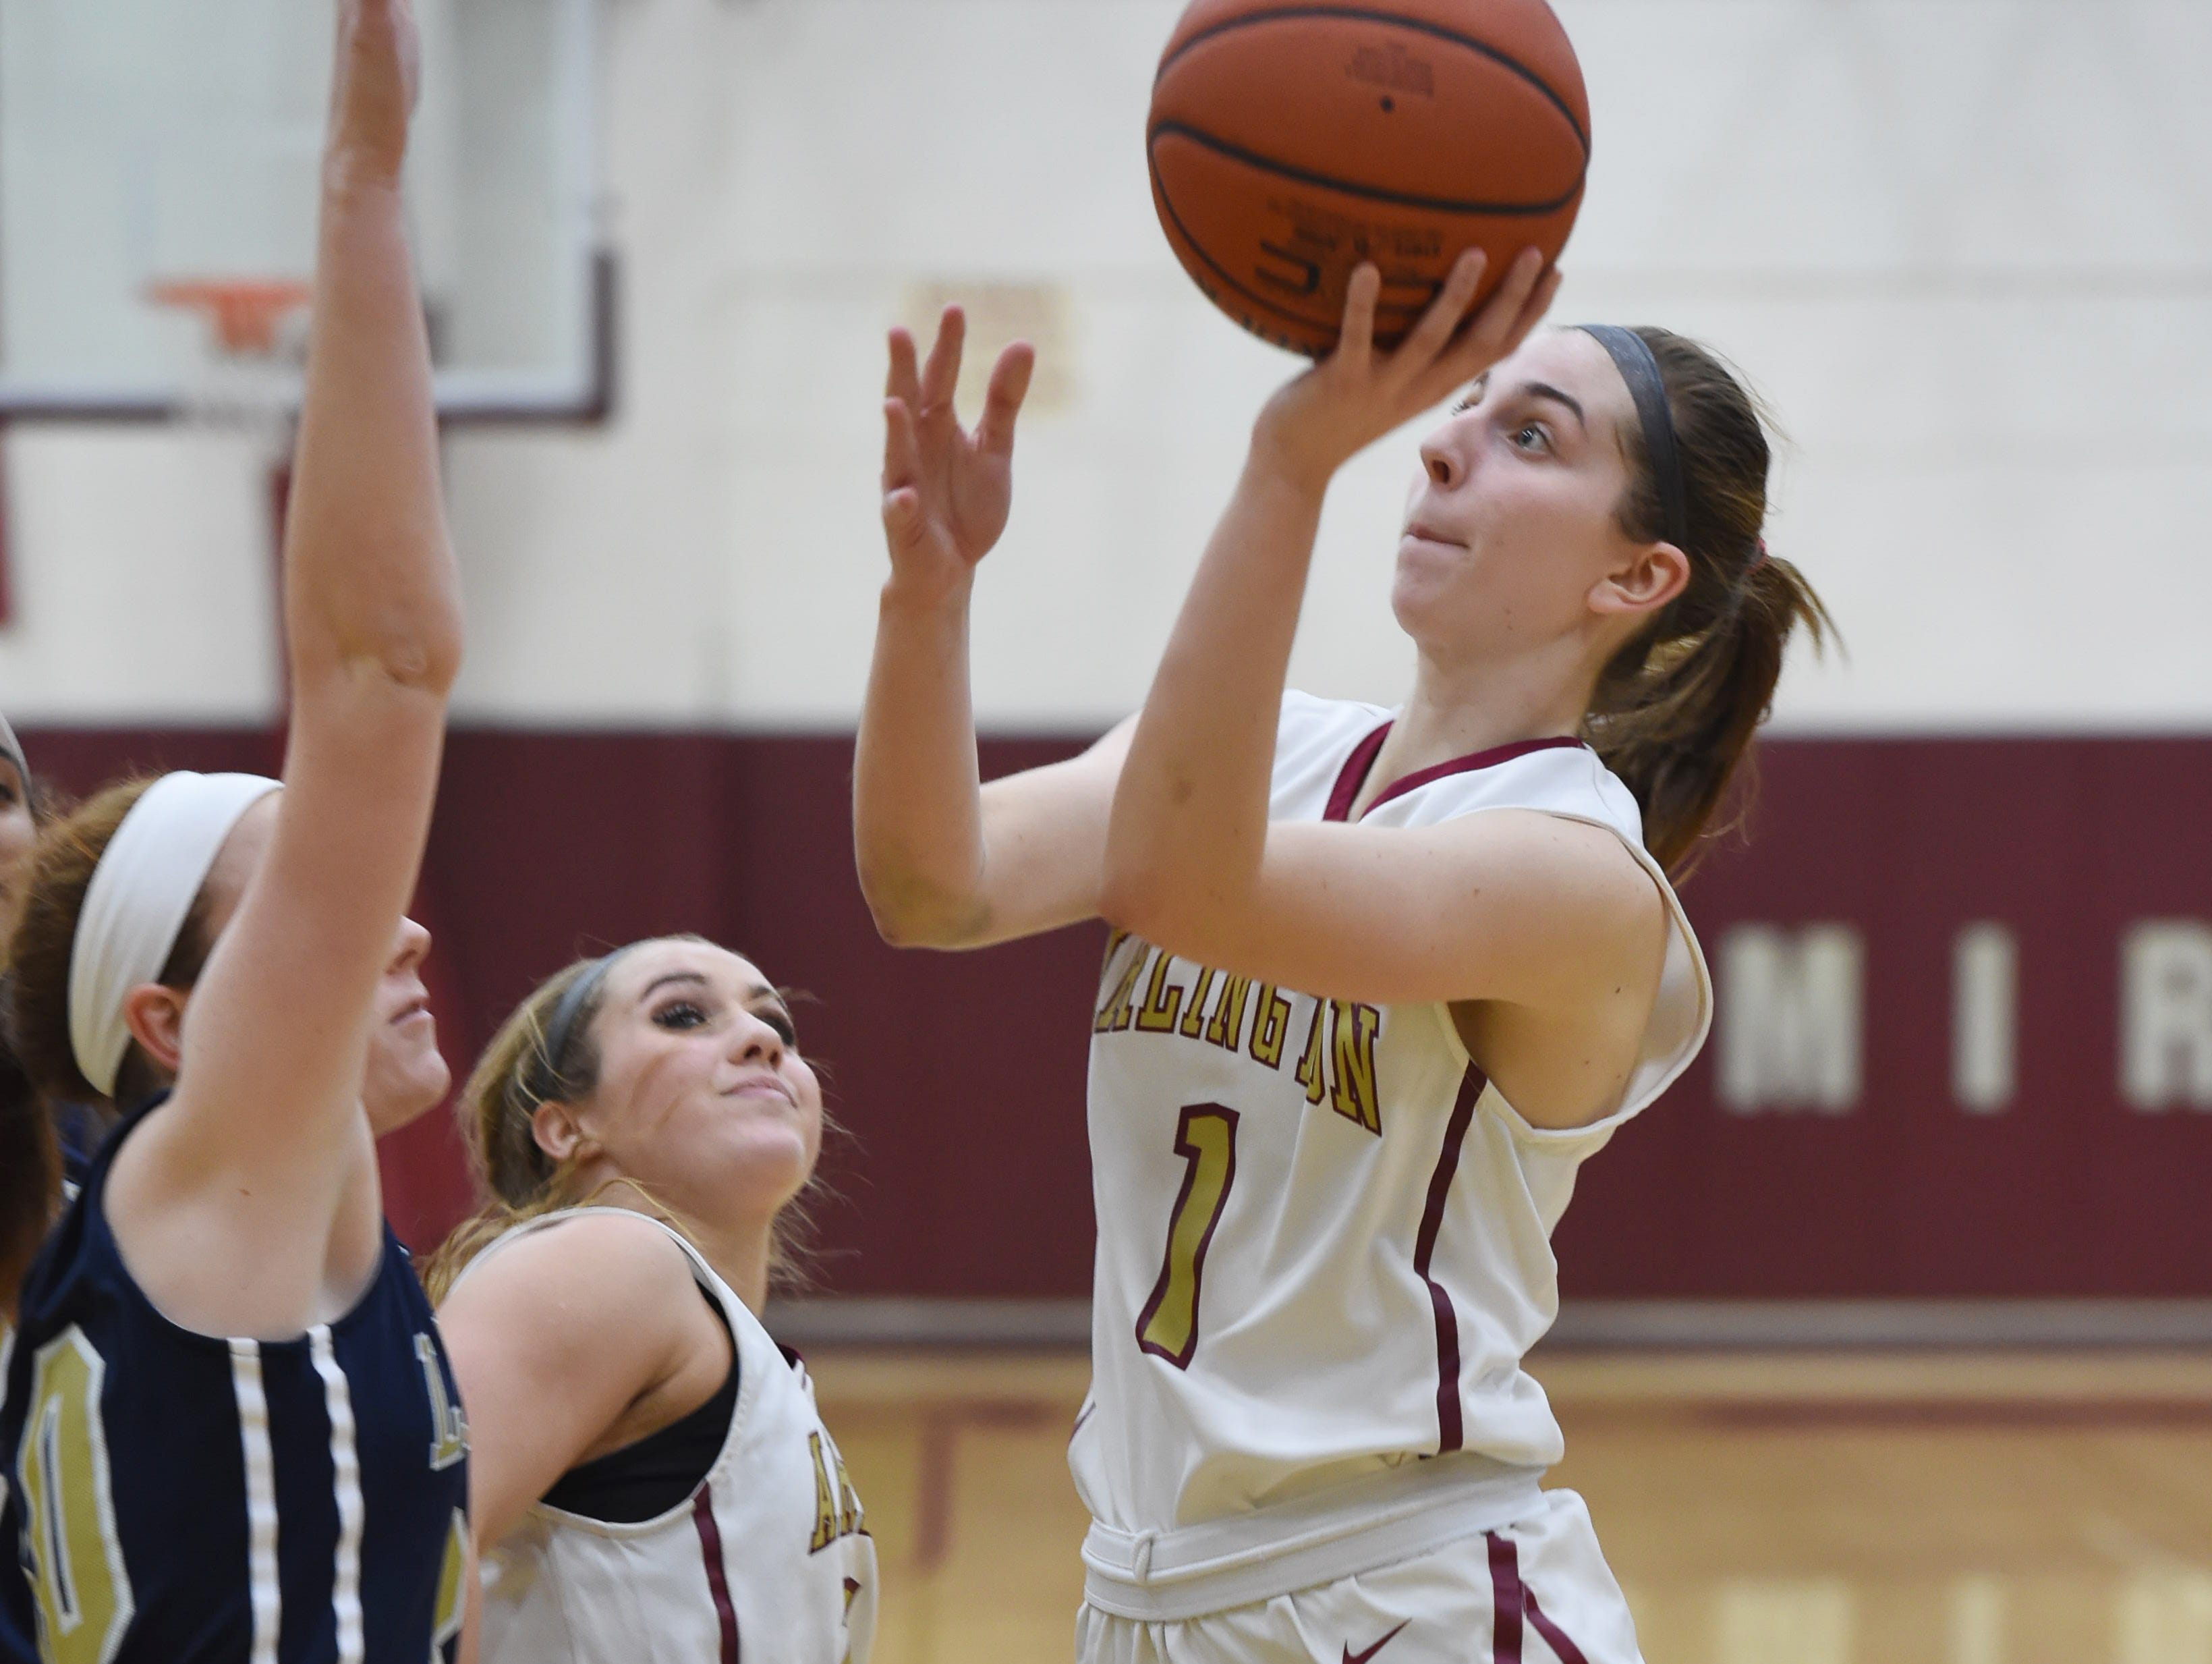 Arlington's Casey Schweitzer takes a shot over Lourdes' Marguerite McGahay during Wednesday's game at Arlington.